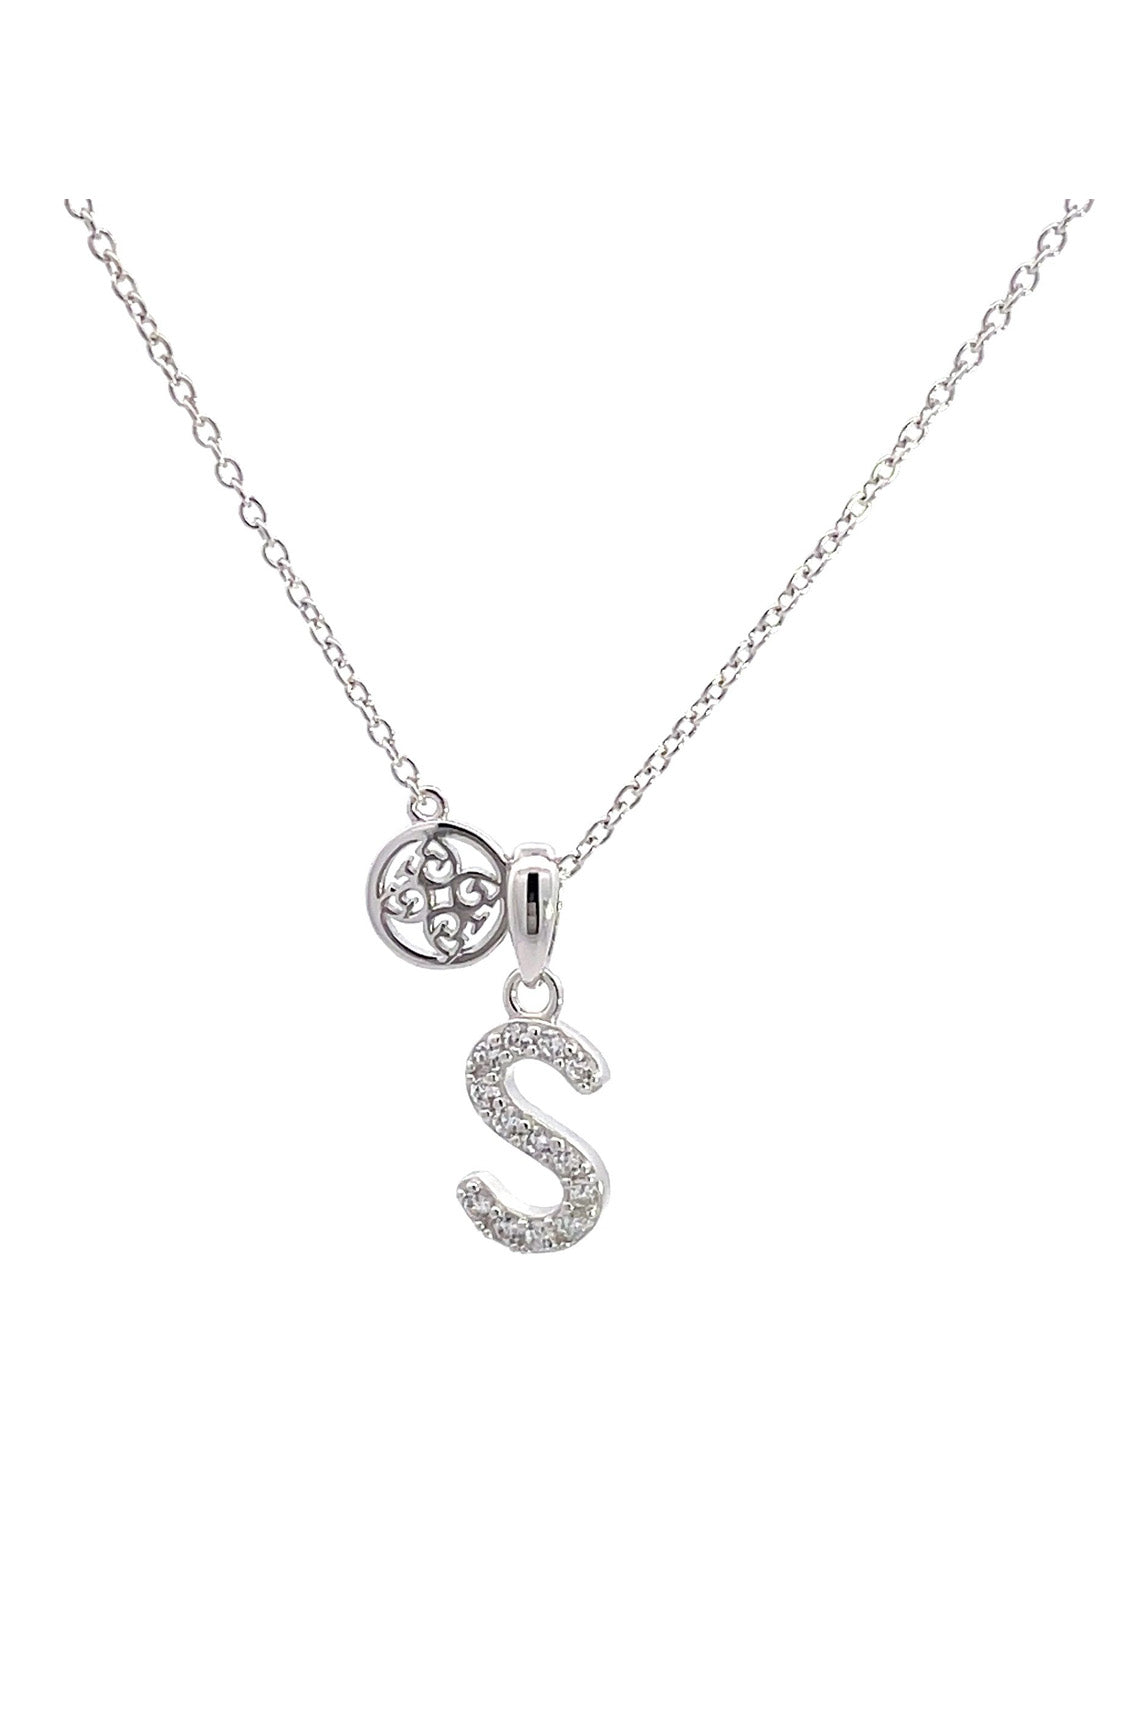 LUXURY LETTERS S INITIAL PENDANT SILVER